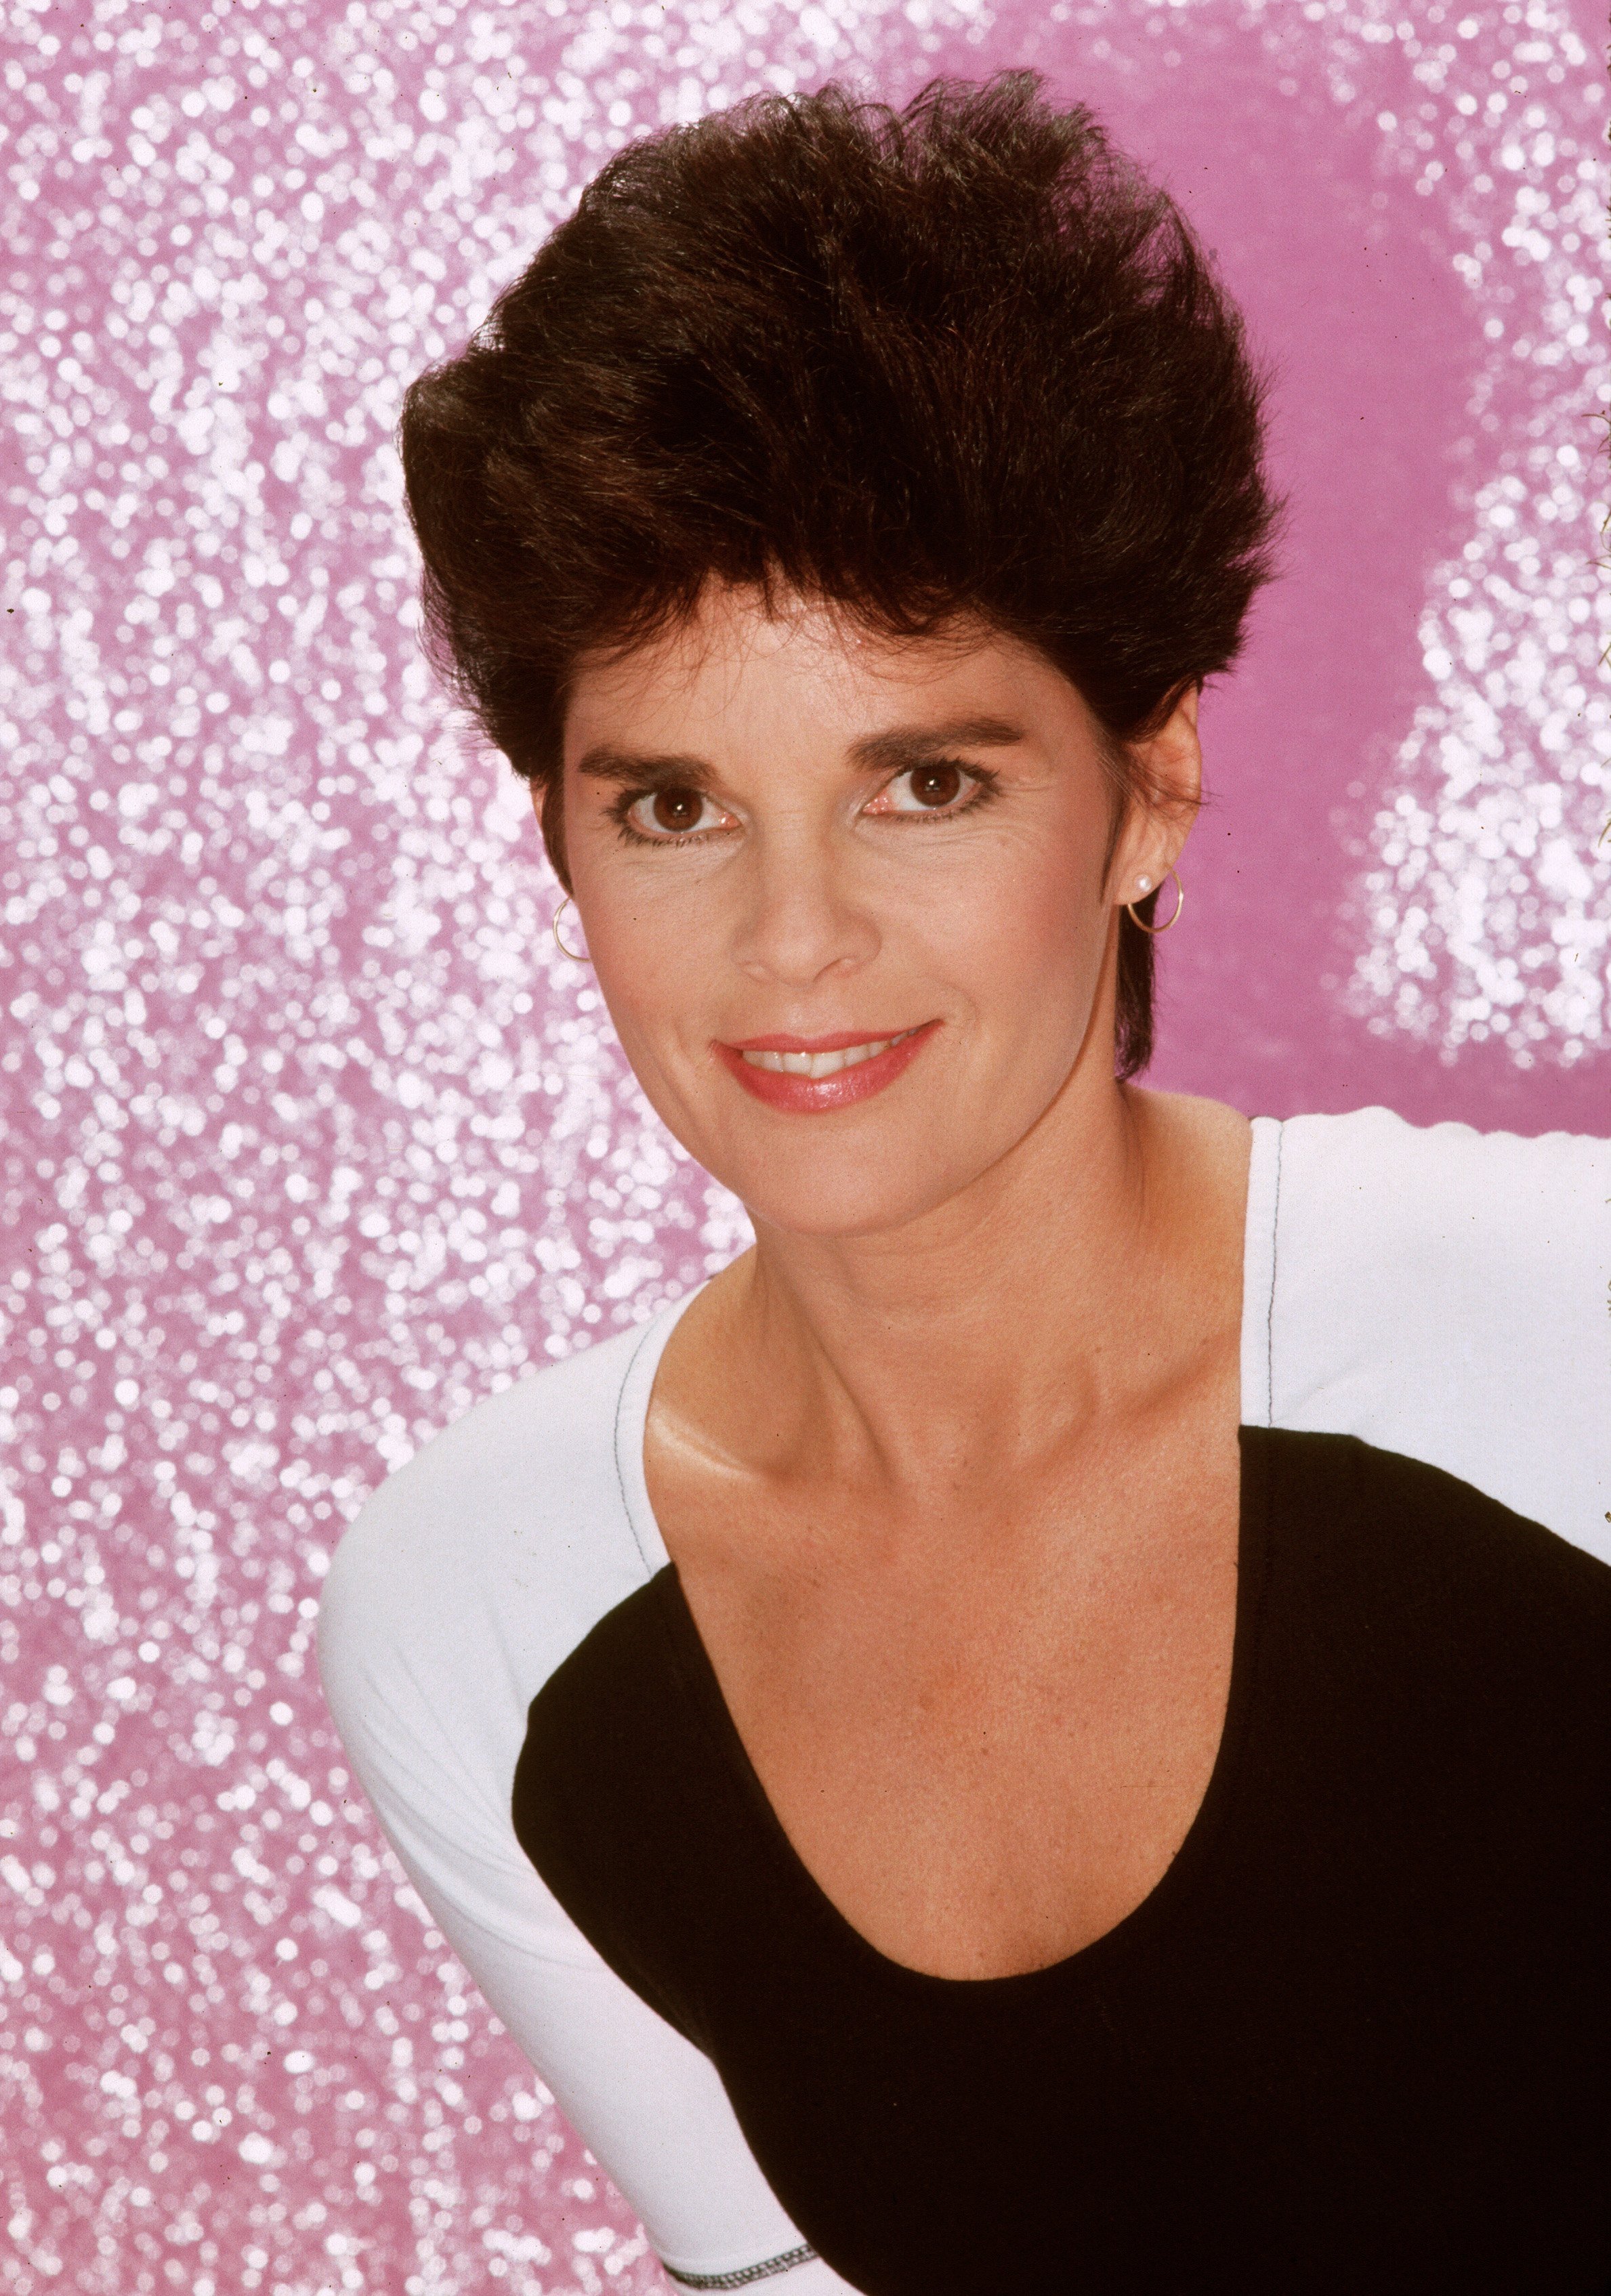 Ali MacGraw poses for a portrait in 1982 in Los Angeles, California. | Source: Getty Images